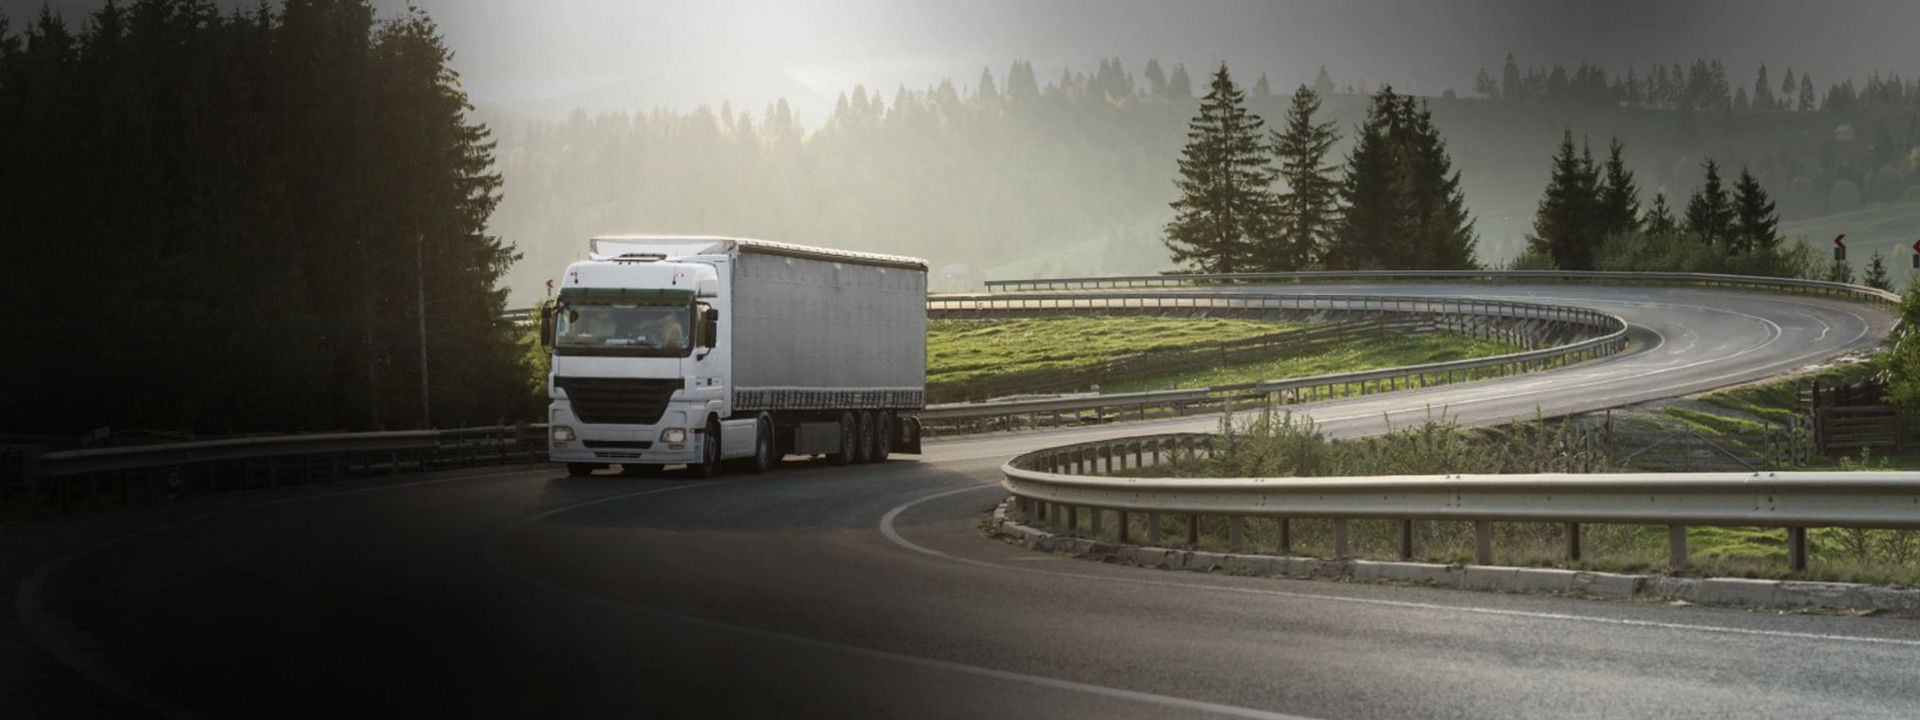 This image shows a long-haul truck driving on a regional road with Bridgestone versatile truck tyres.